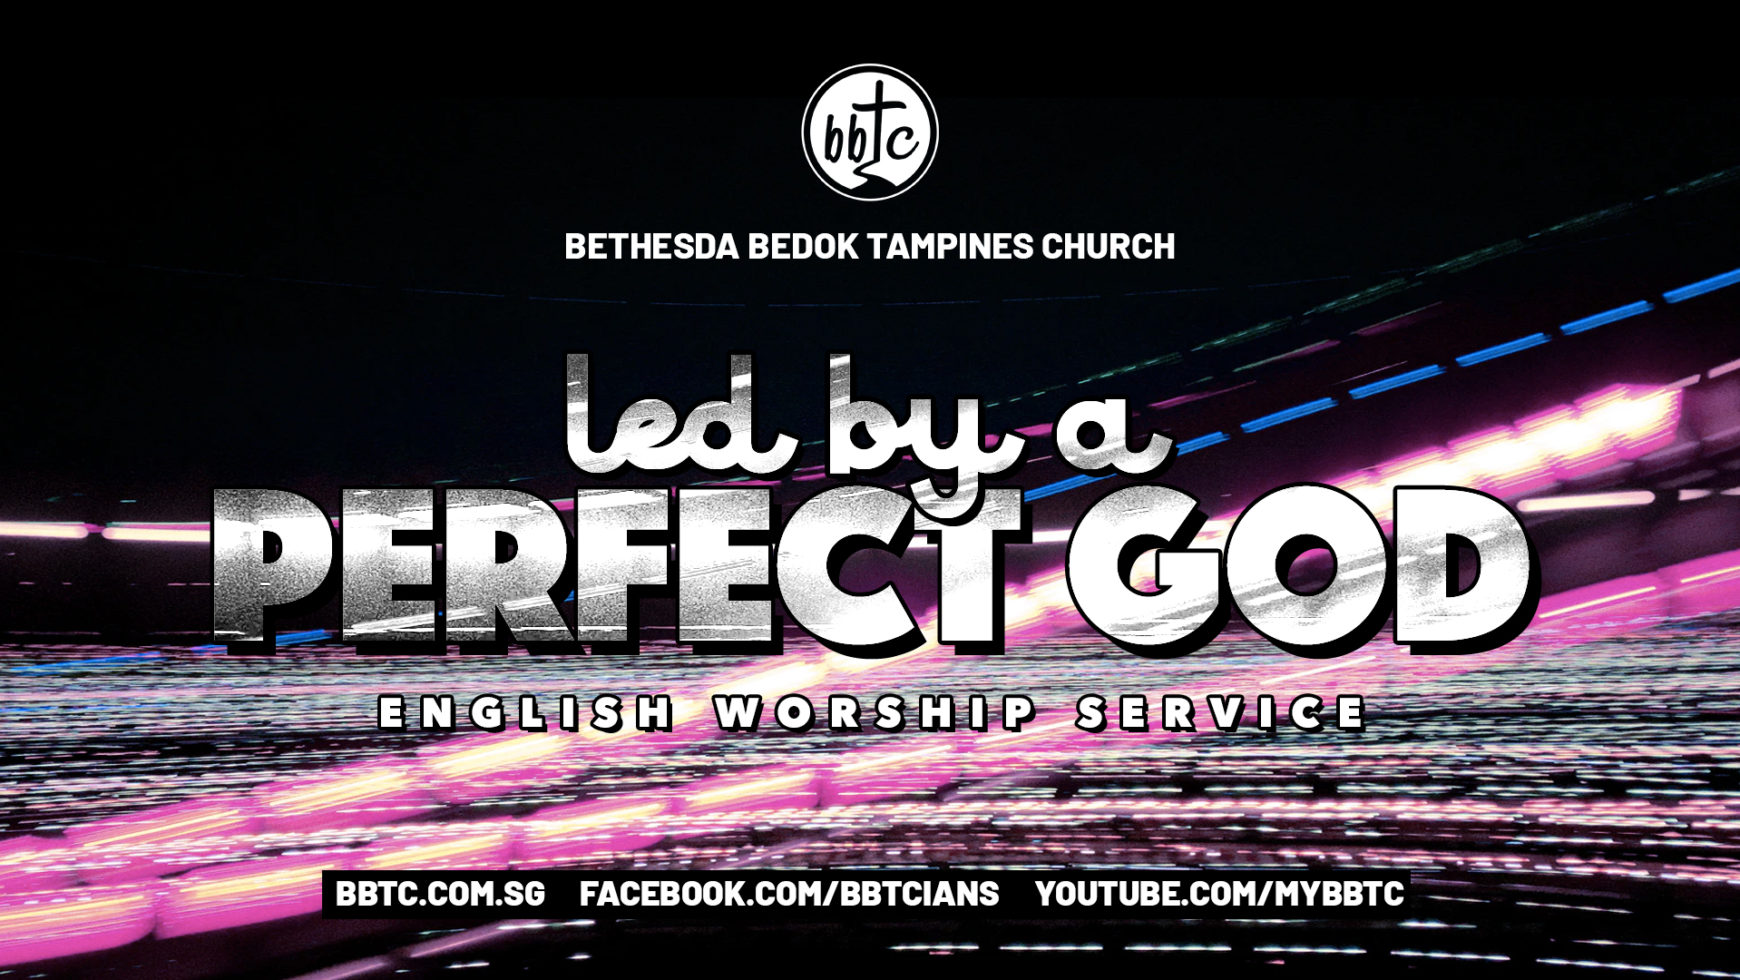 Led by a Perfect God